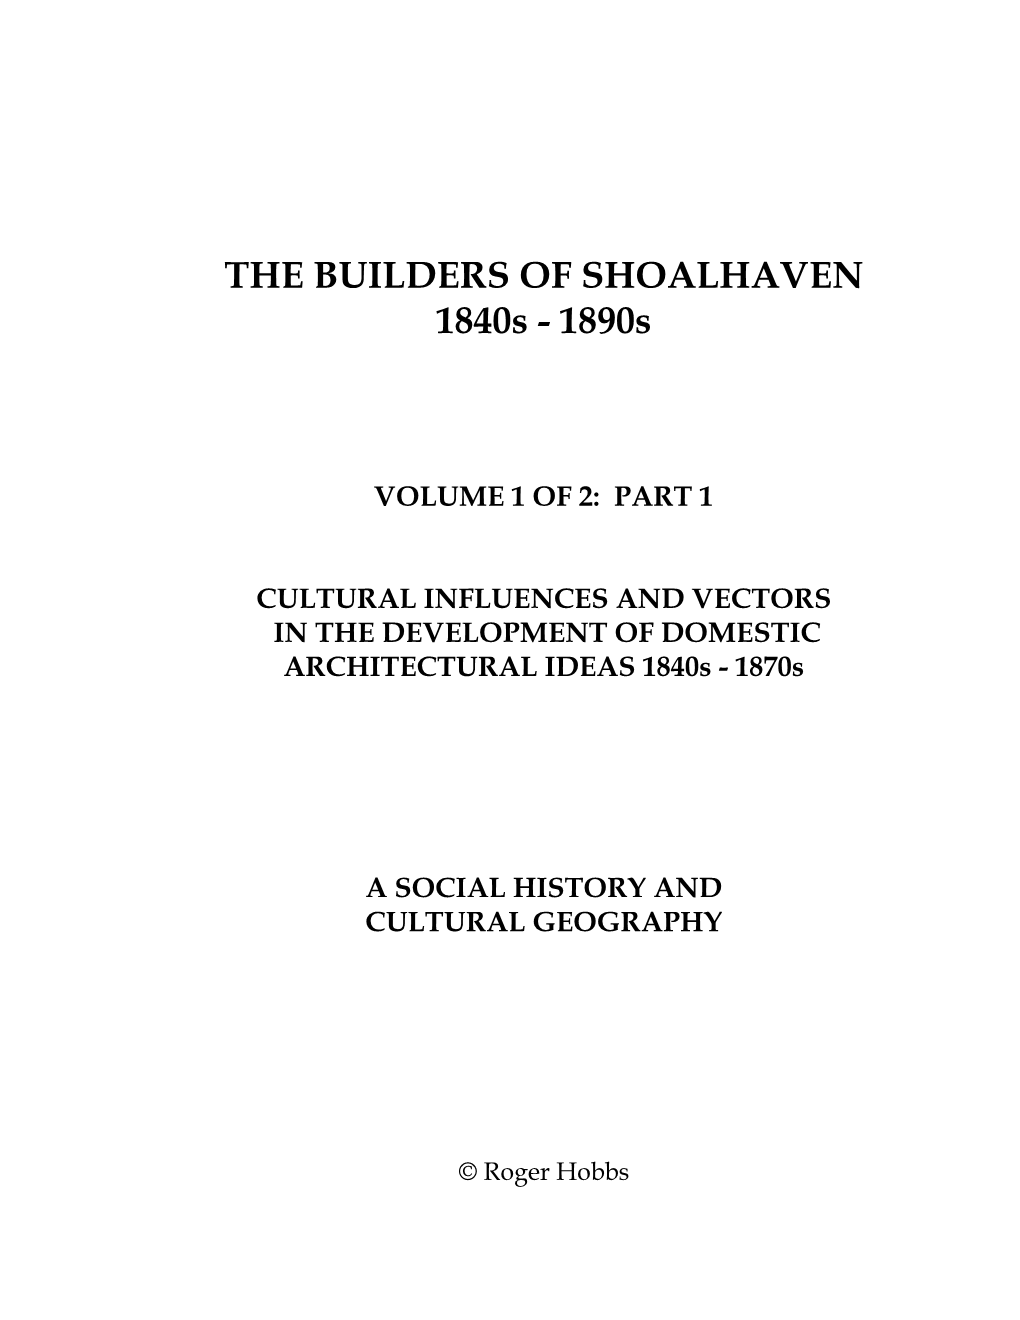 THE BUILDERS of SHOALHAVEN 1840S - 1890S